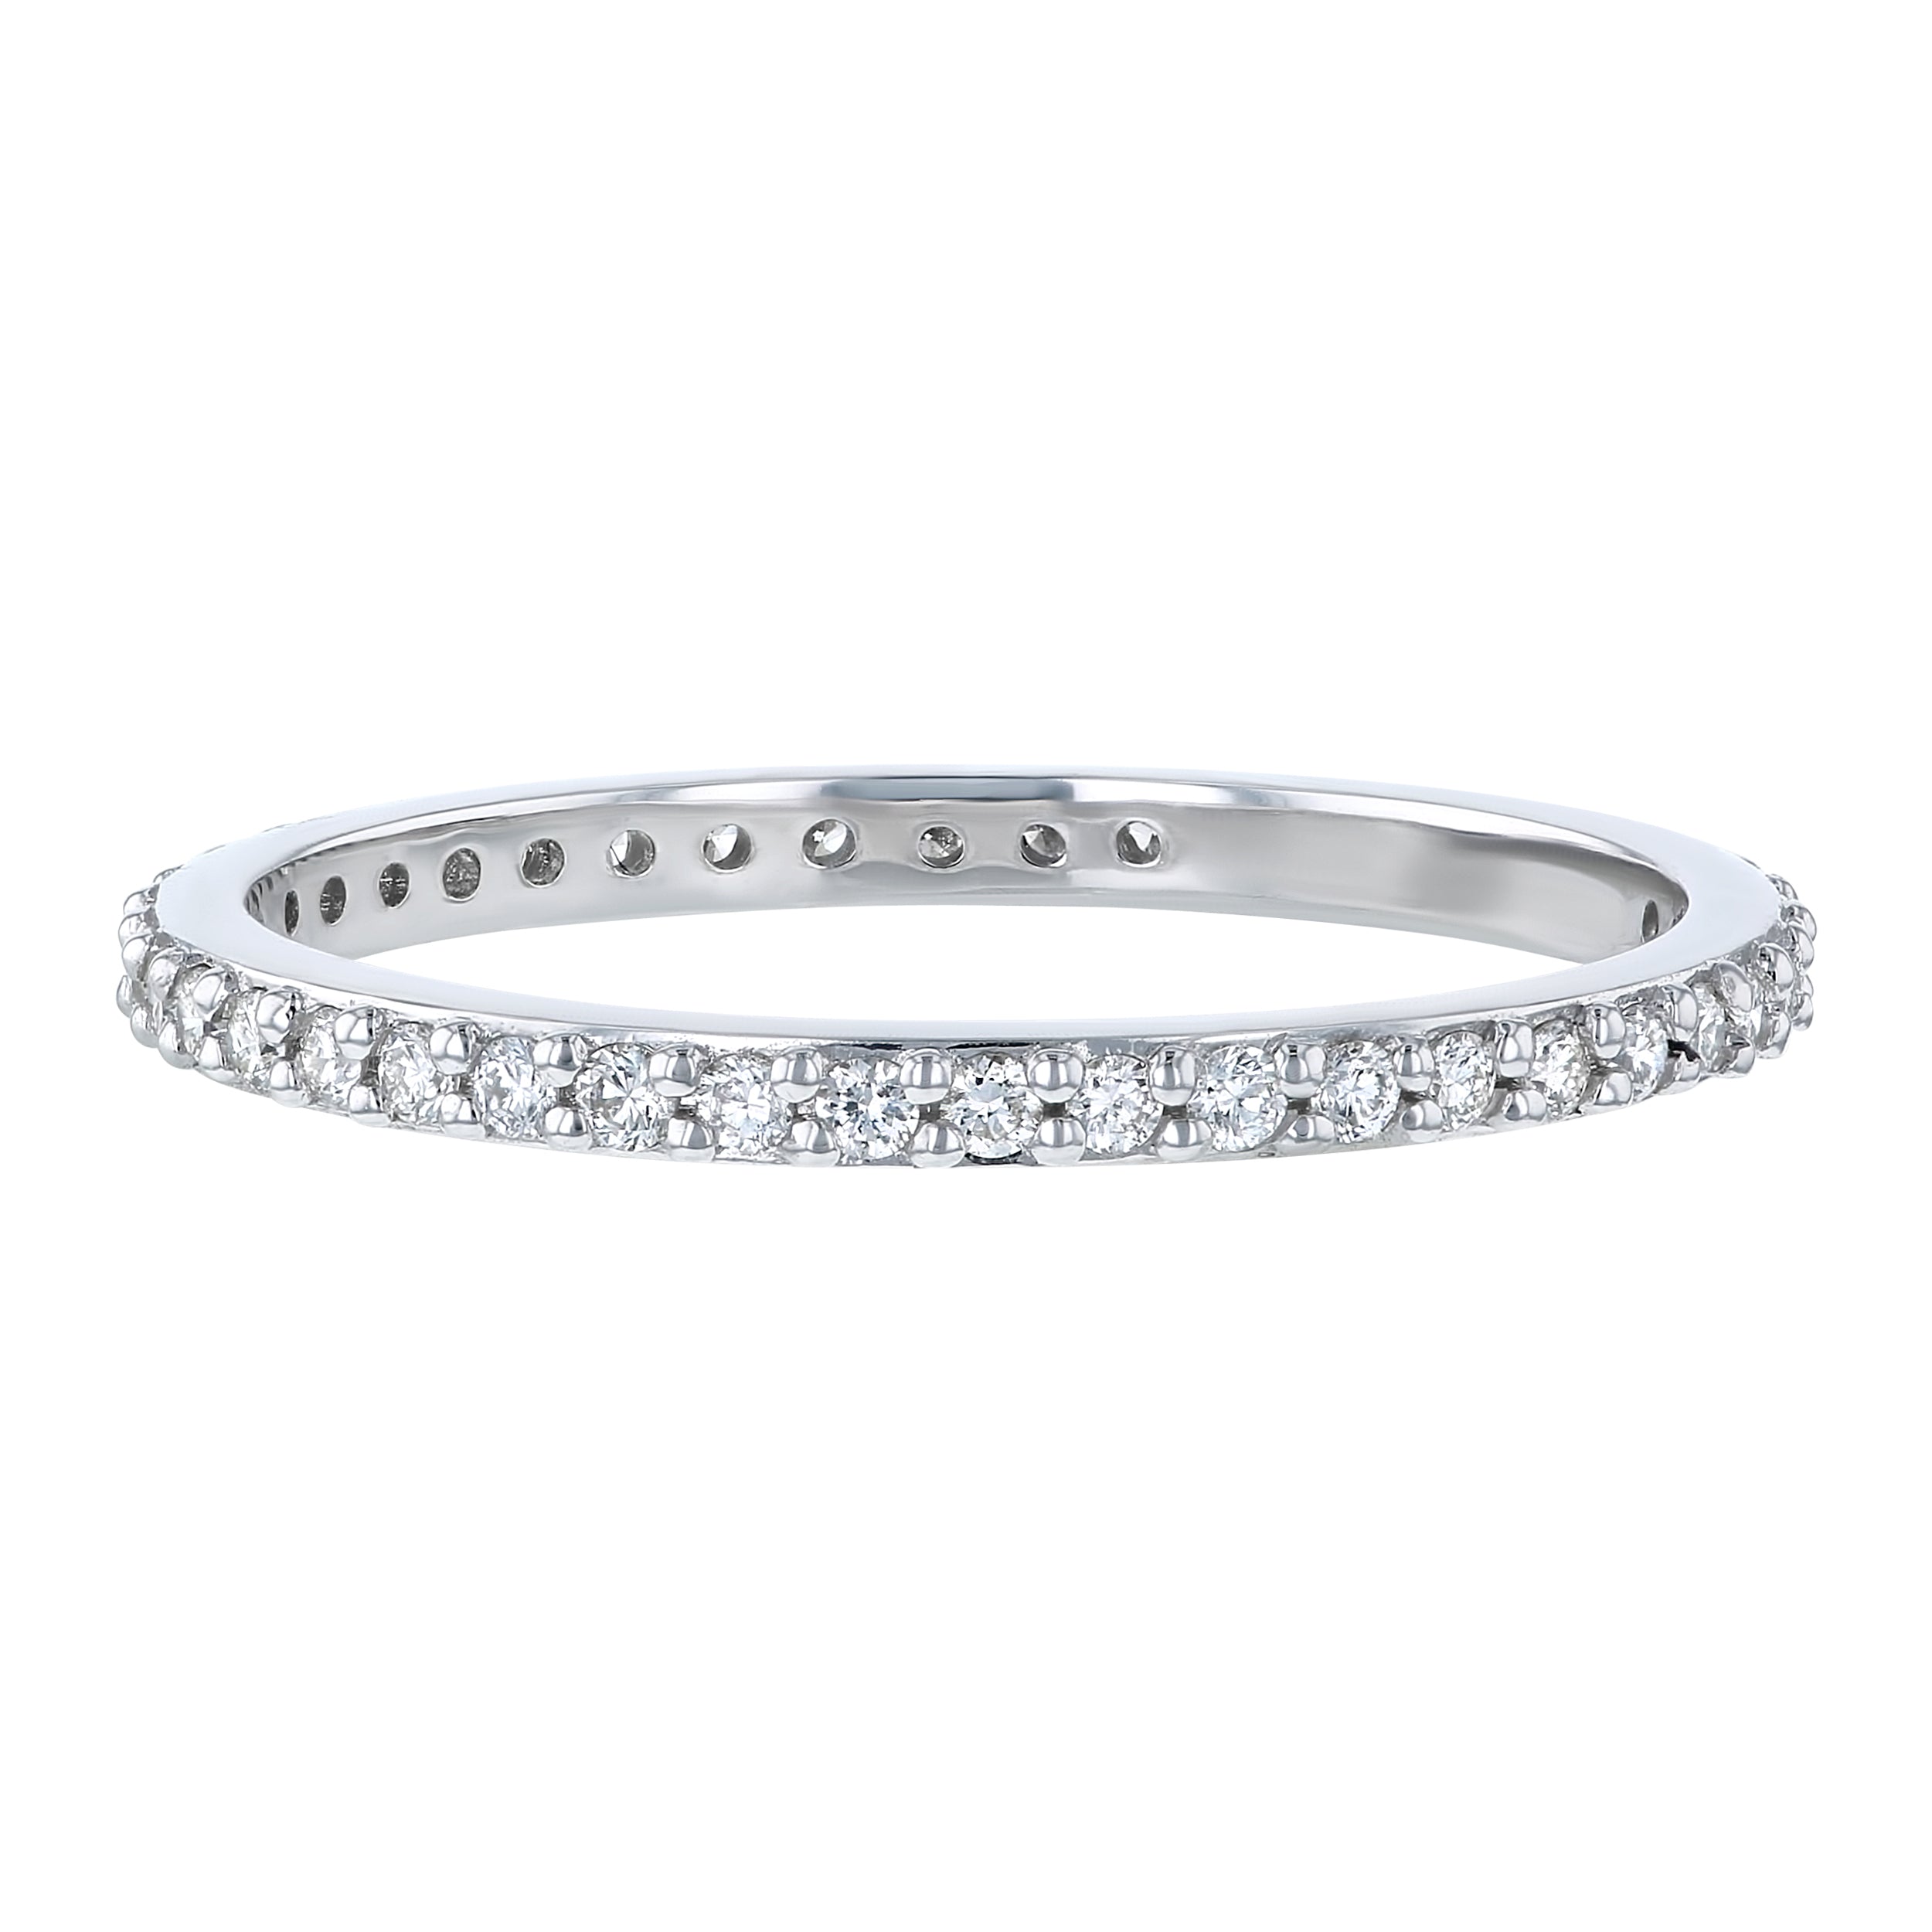 14KT DIAMOND ETERNITY BANDS WITH .33CTS